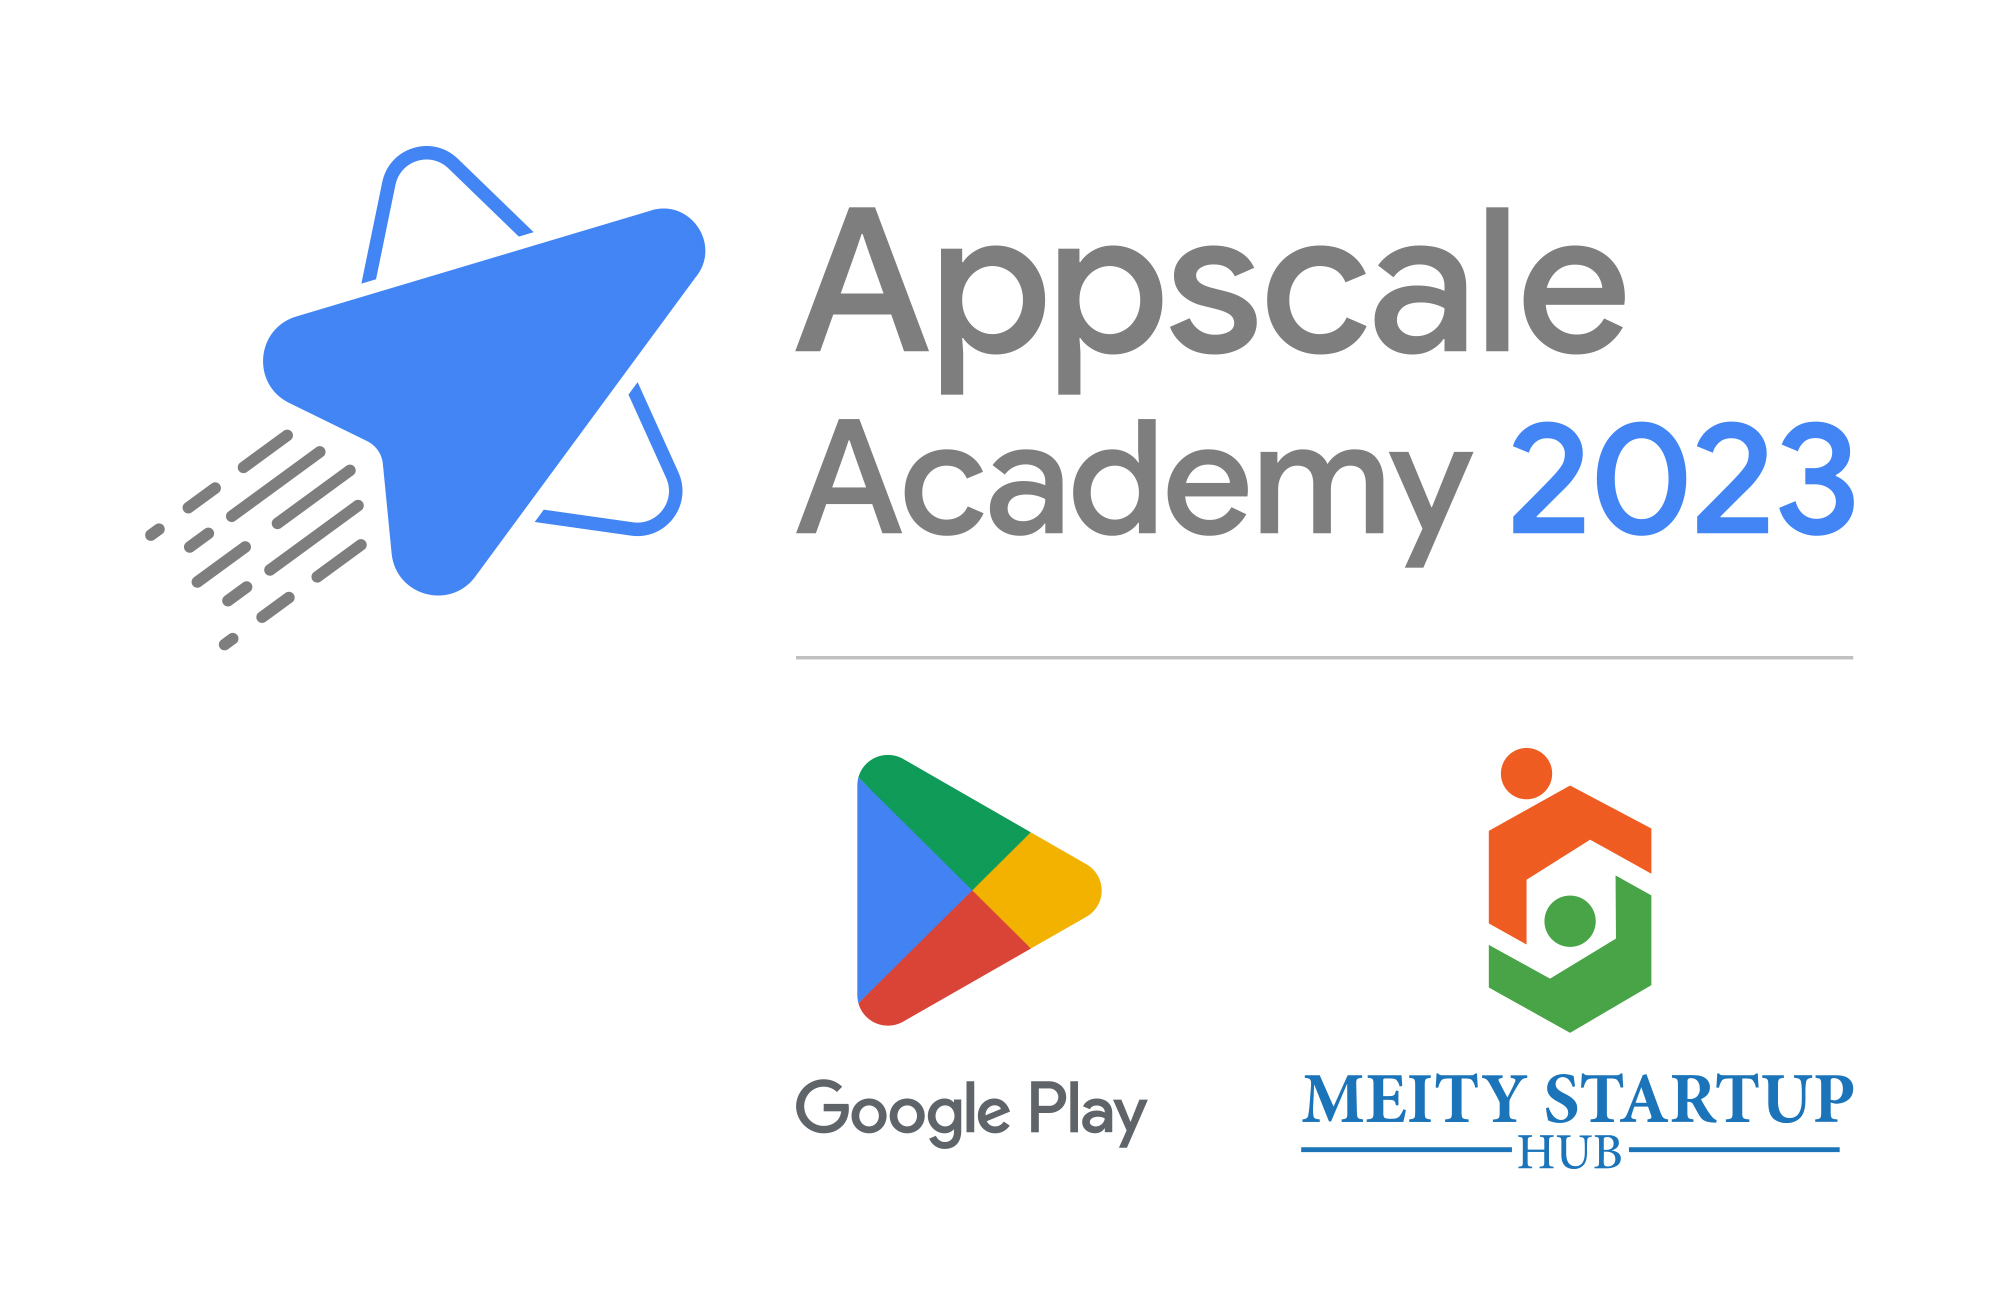 As a component of Appscale Academy''s Class of 2023, MeitYStartup Hub and Google will provide assistance to 100 Indian startups